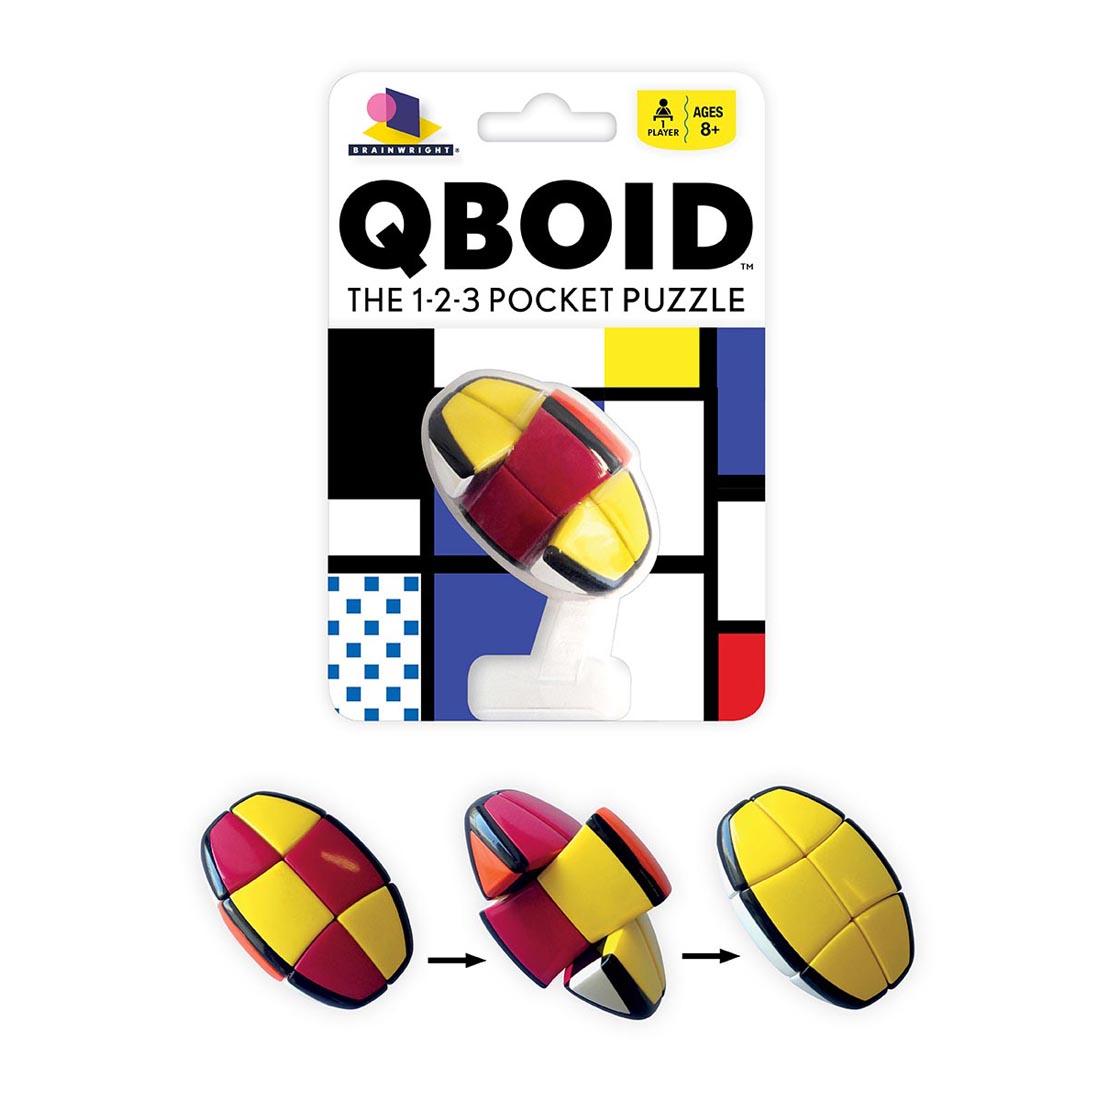 QBOID Pocket Puzzle in package, plus shown in 3 different stages of solving